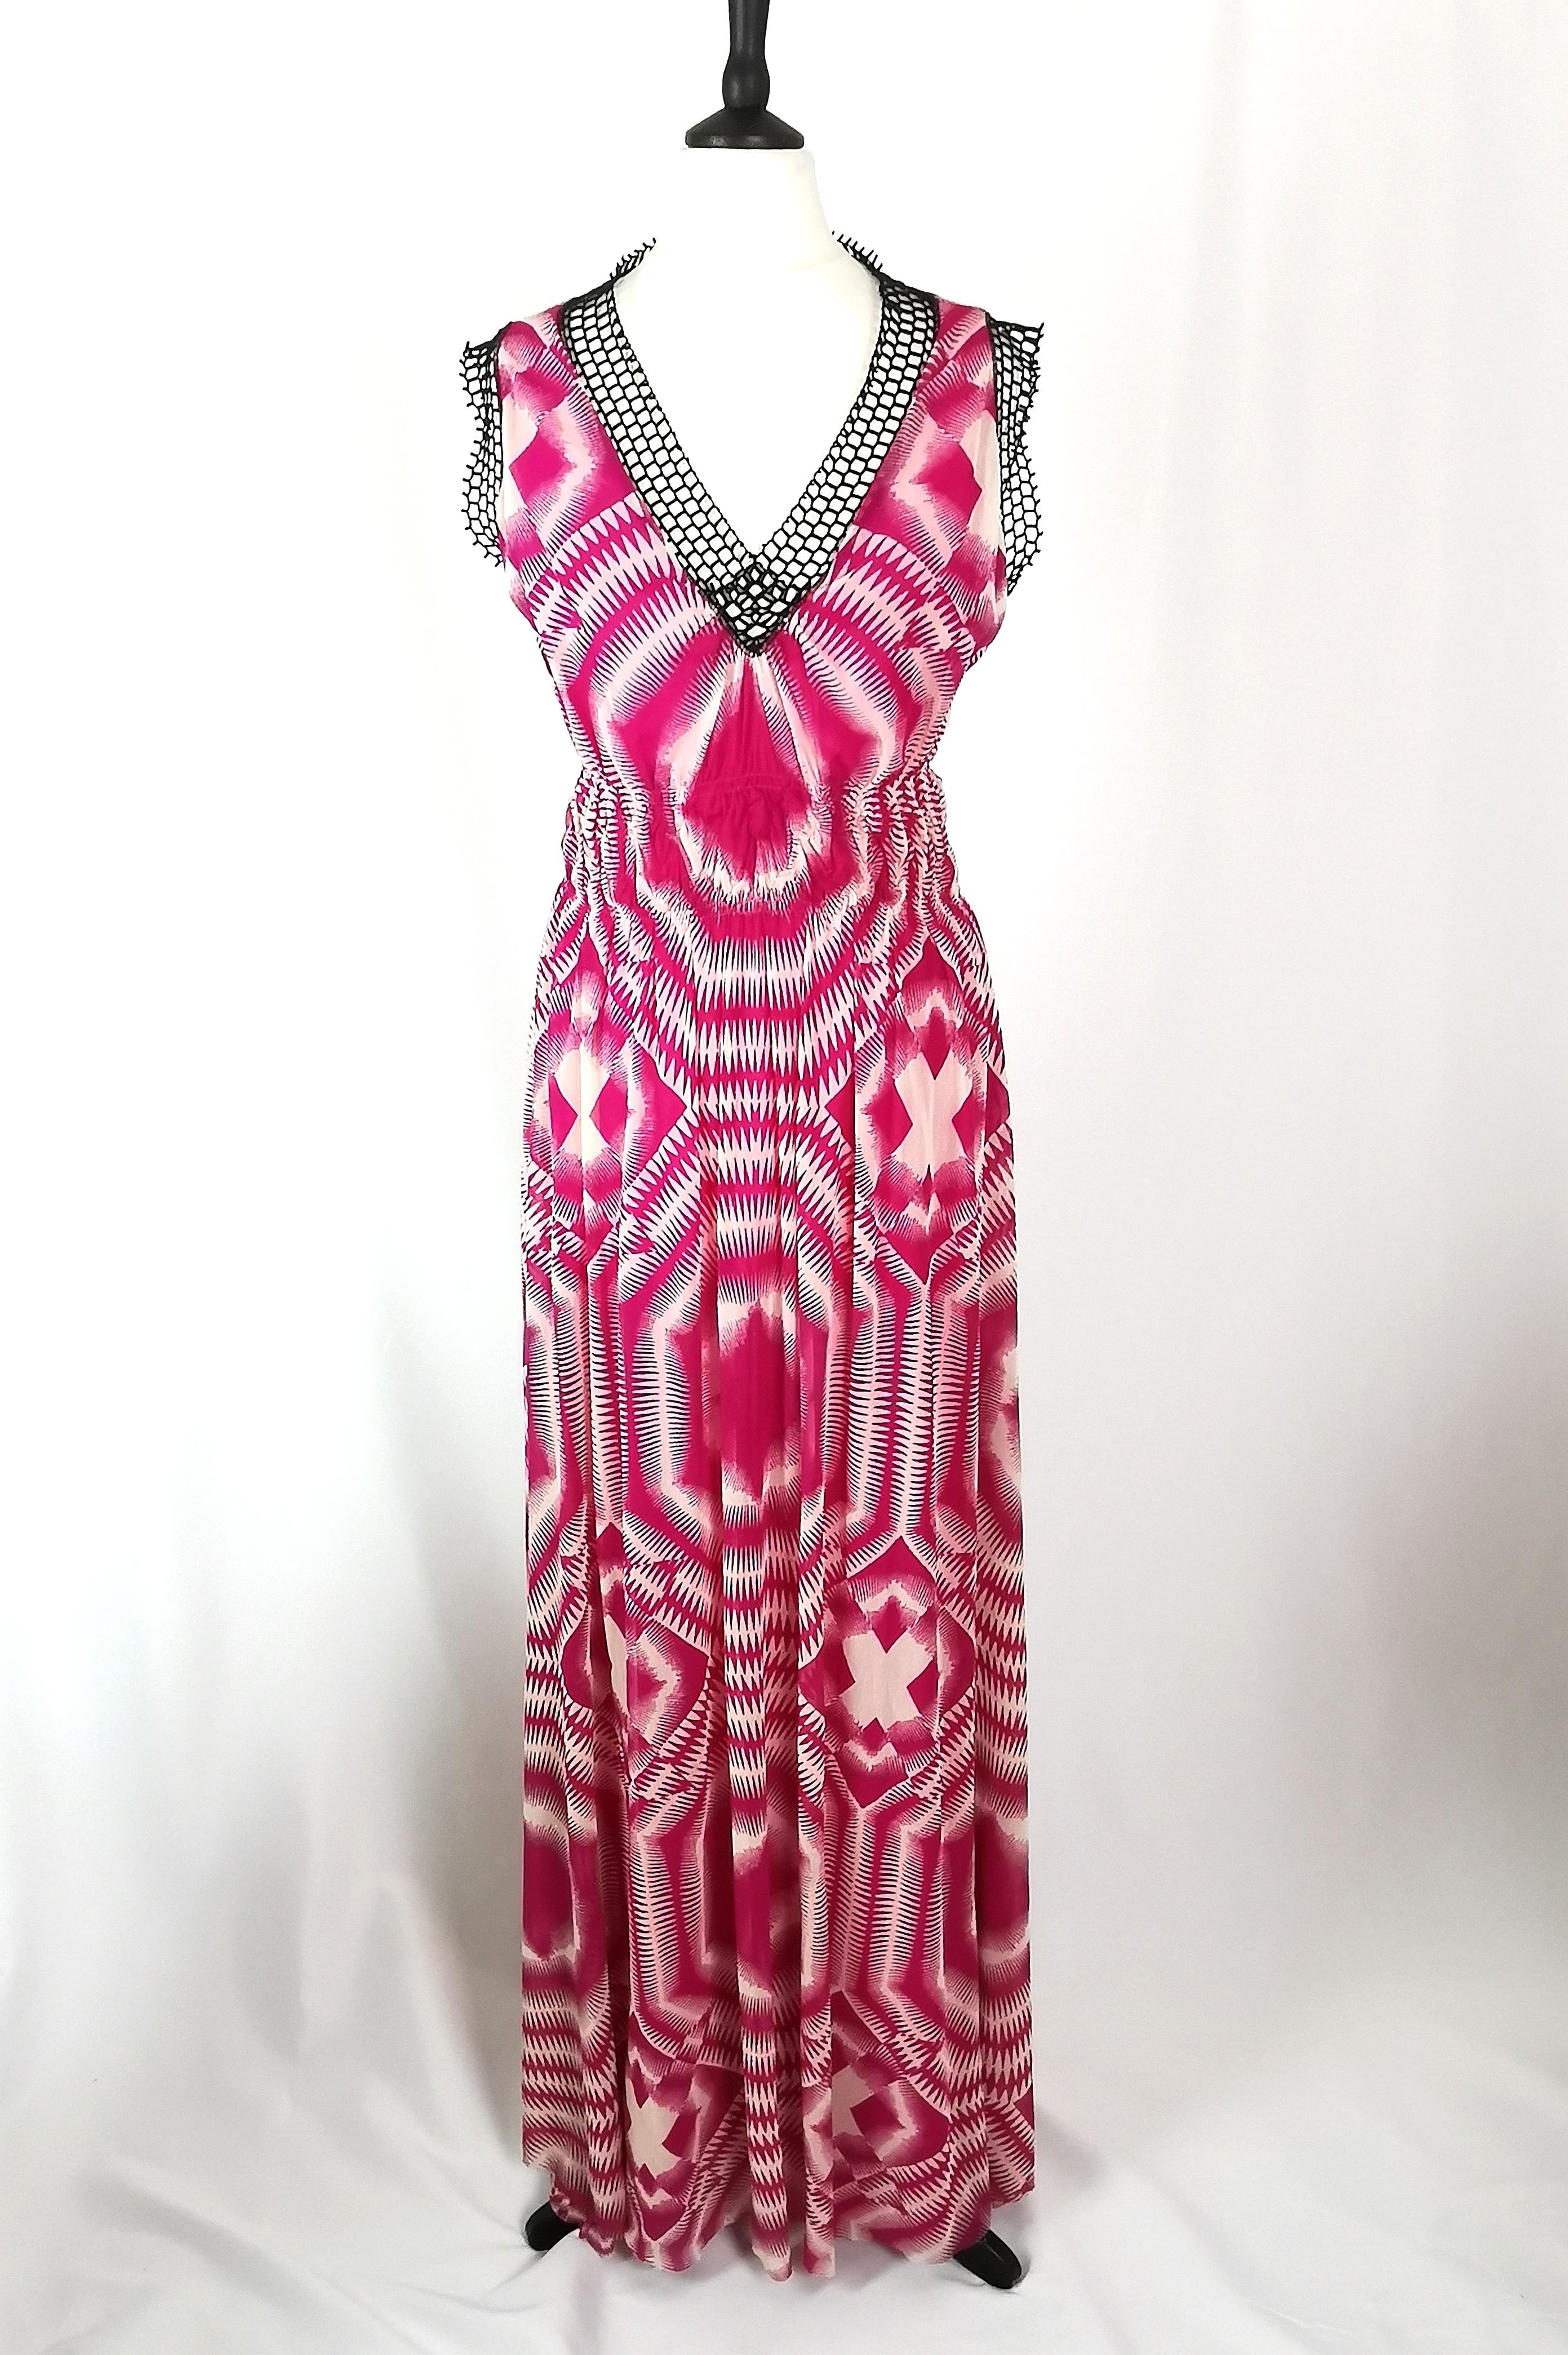 An iconic vintage Jean Paul Gaultier Soleil maxi dress.

It is made from a lovely lightweight synthetic chiffon, fully lined skirts and has an all over abstract tie dye style print in a vibrant magenta, such a popular 90s festival style.

It has a